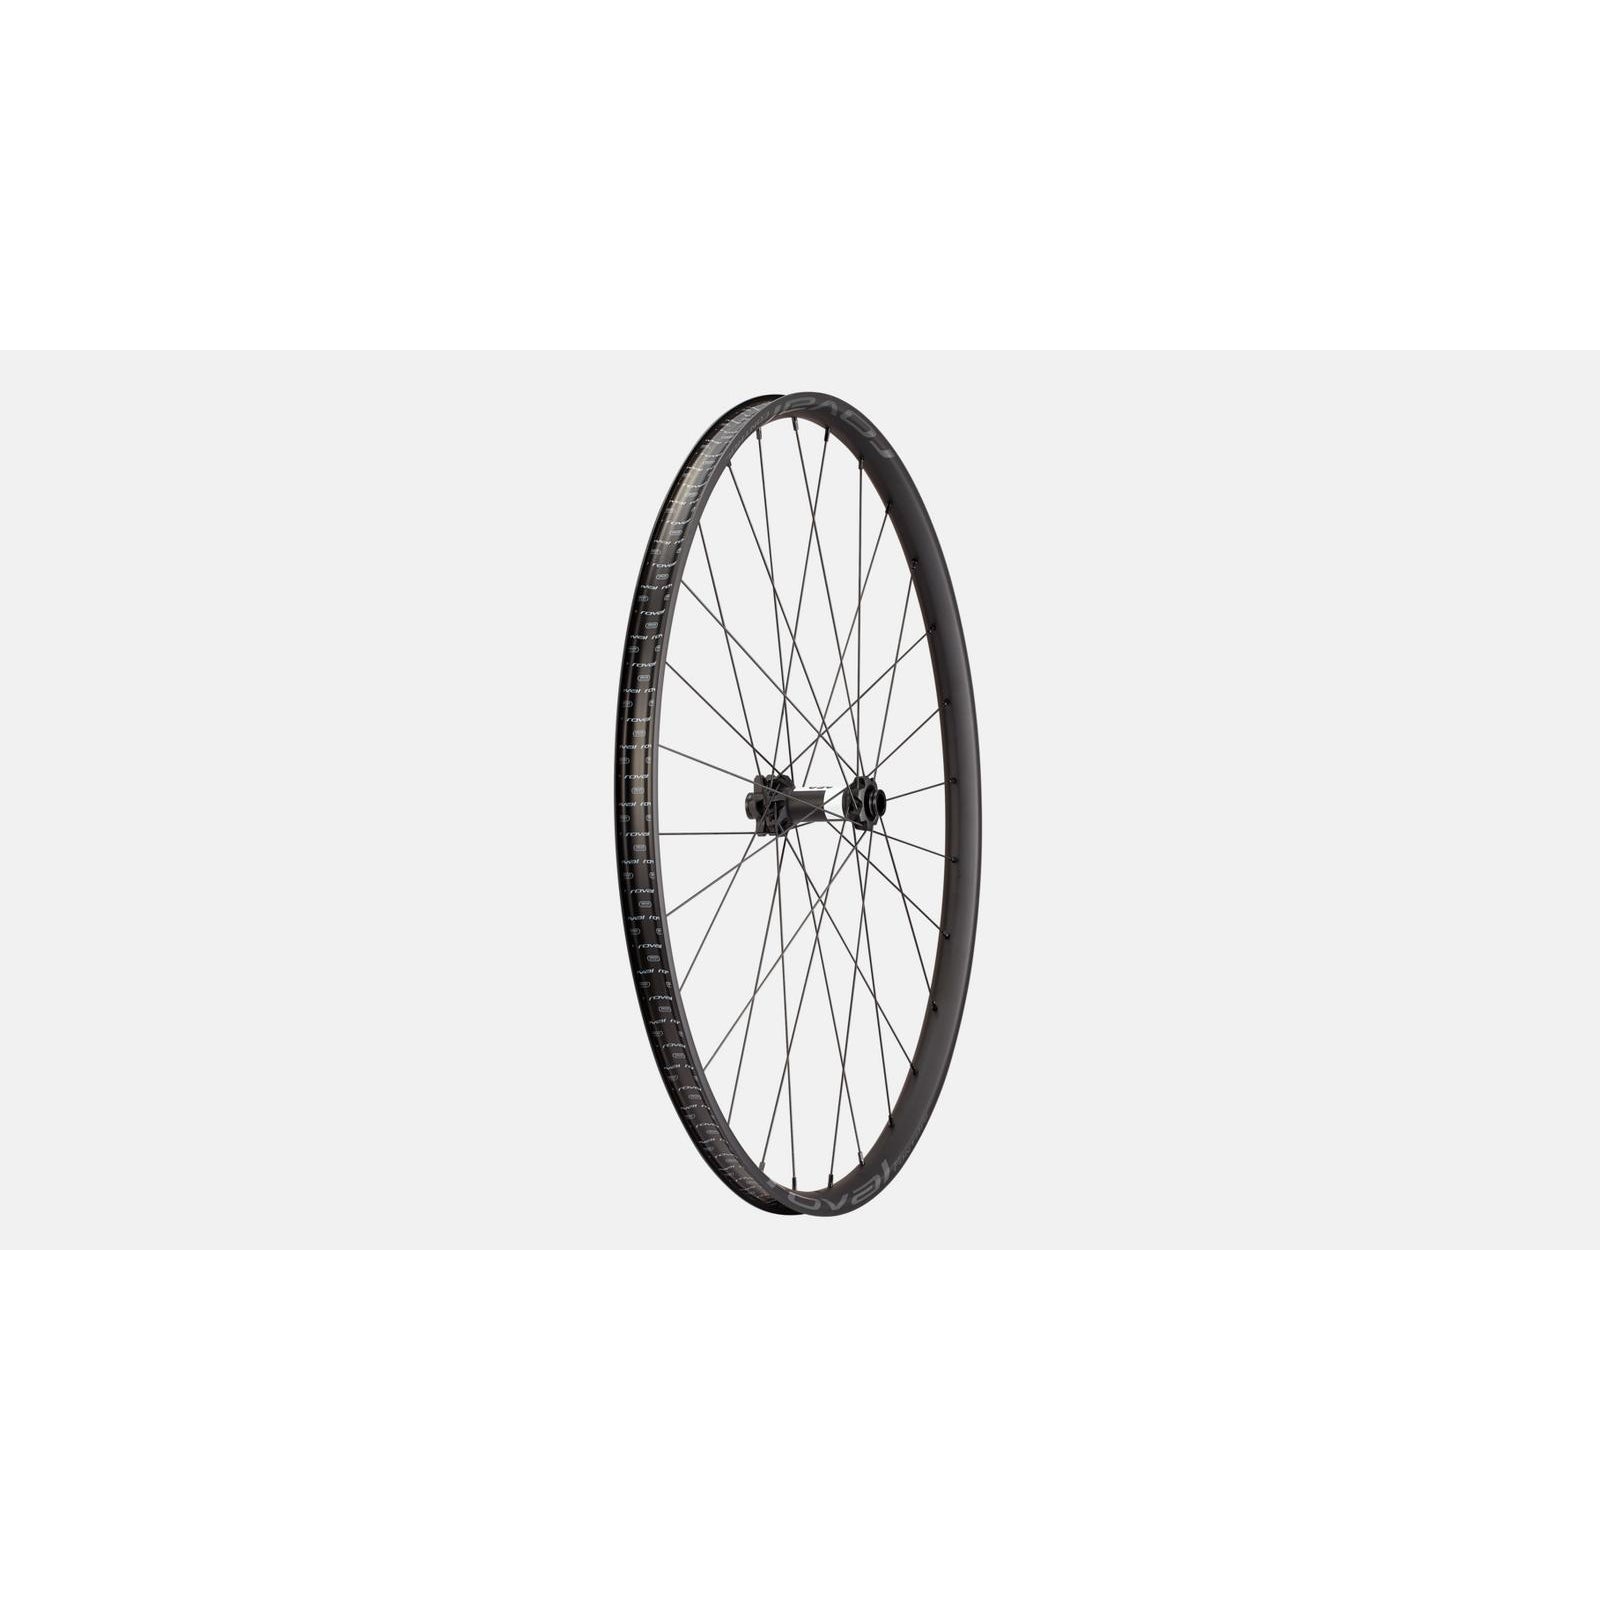 Specialized Roval Control Alloy 350 6B - Bicycle Rims - Bicycle Warehouse